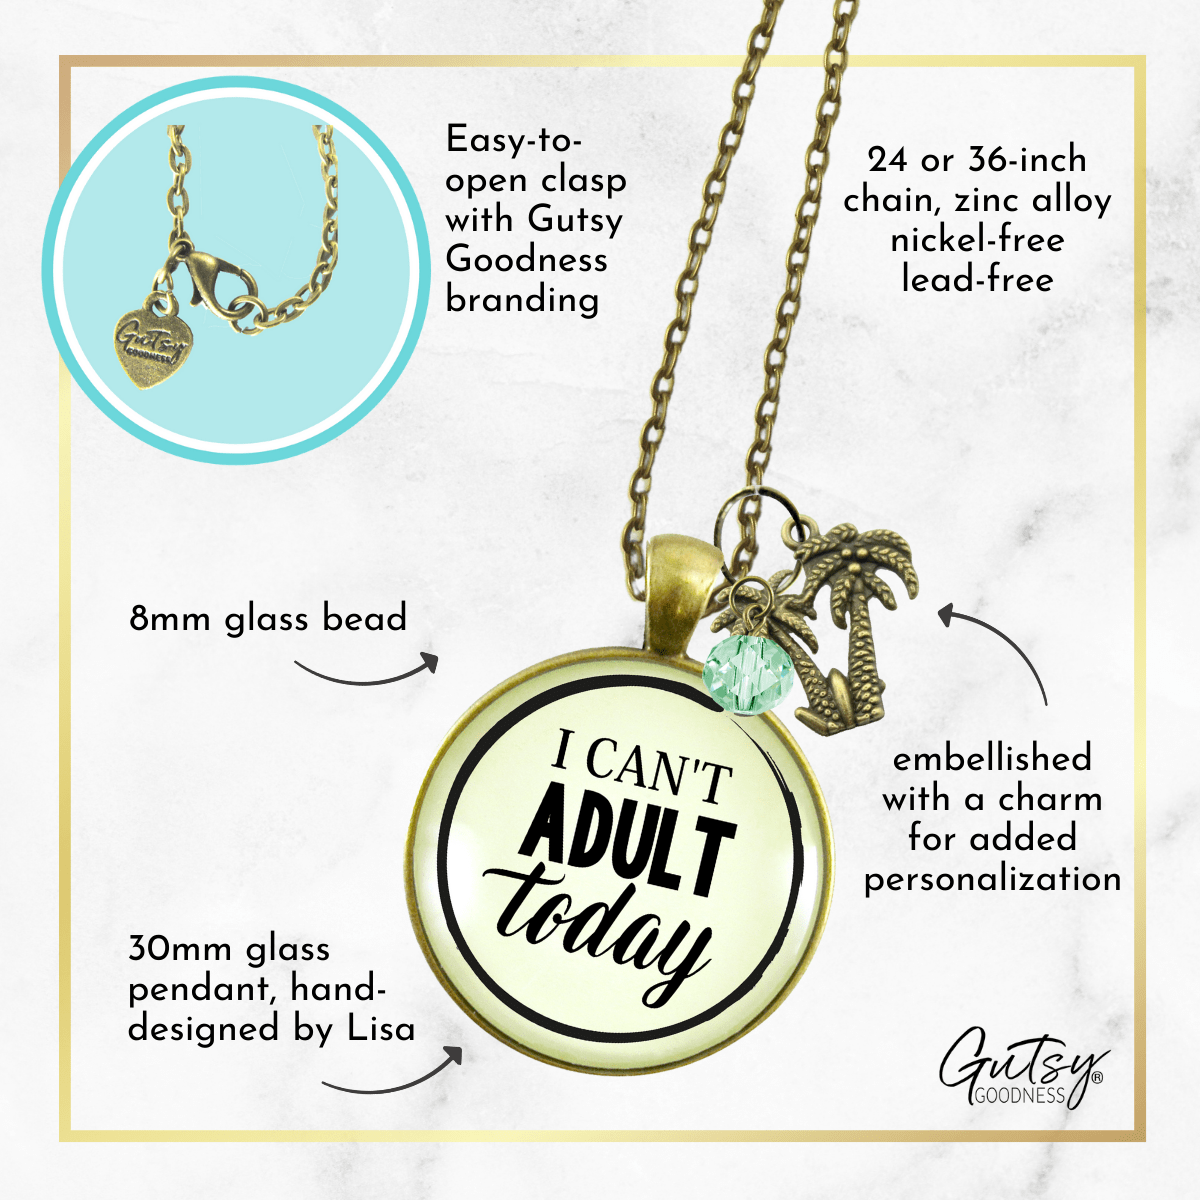 Gutsy Goodness I Can't Adult Today Necklace Funny Tropical Theme Palm Tree Jewelry - Gutsy Goodness;I Can't Adult Today Necklace Funny Tropical Theme Palm Tree Jewelry - Gutsy Goodness Handmade Jewelry Gifts